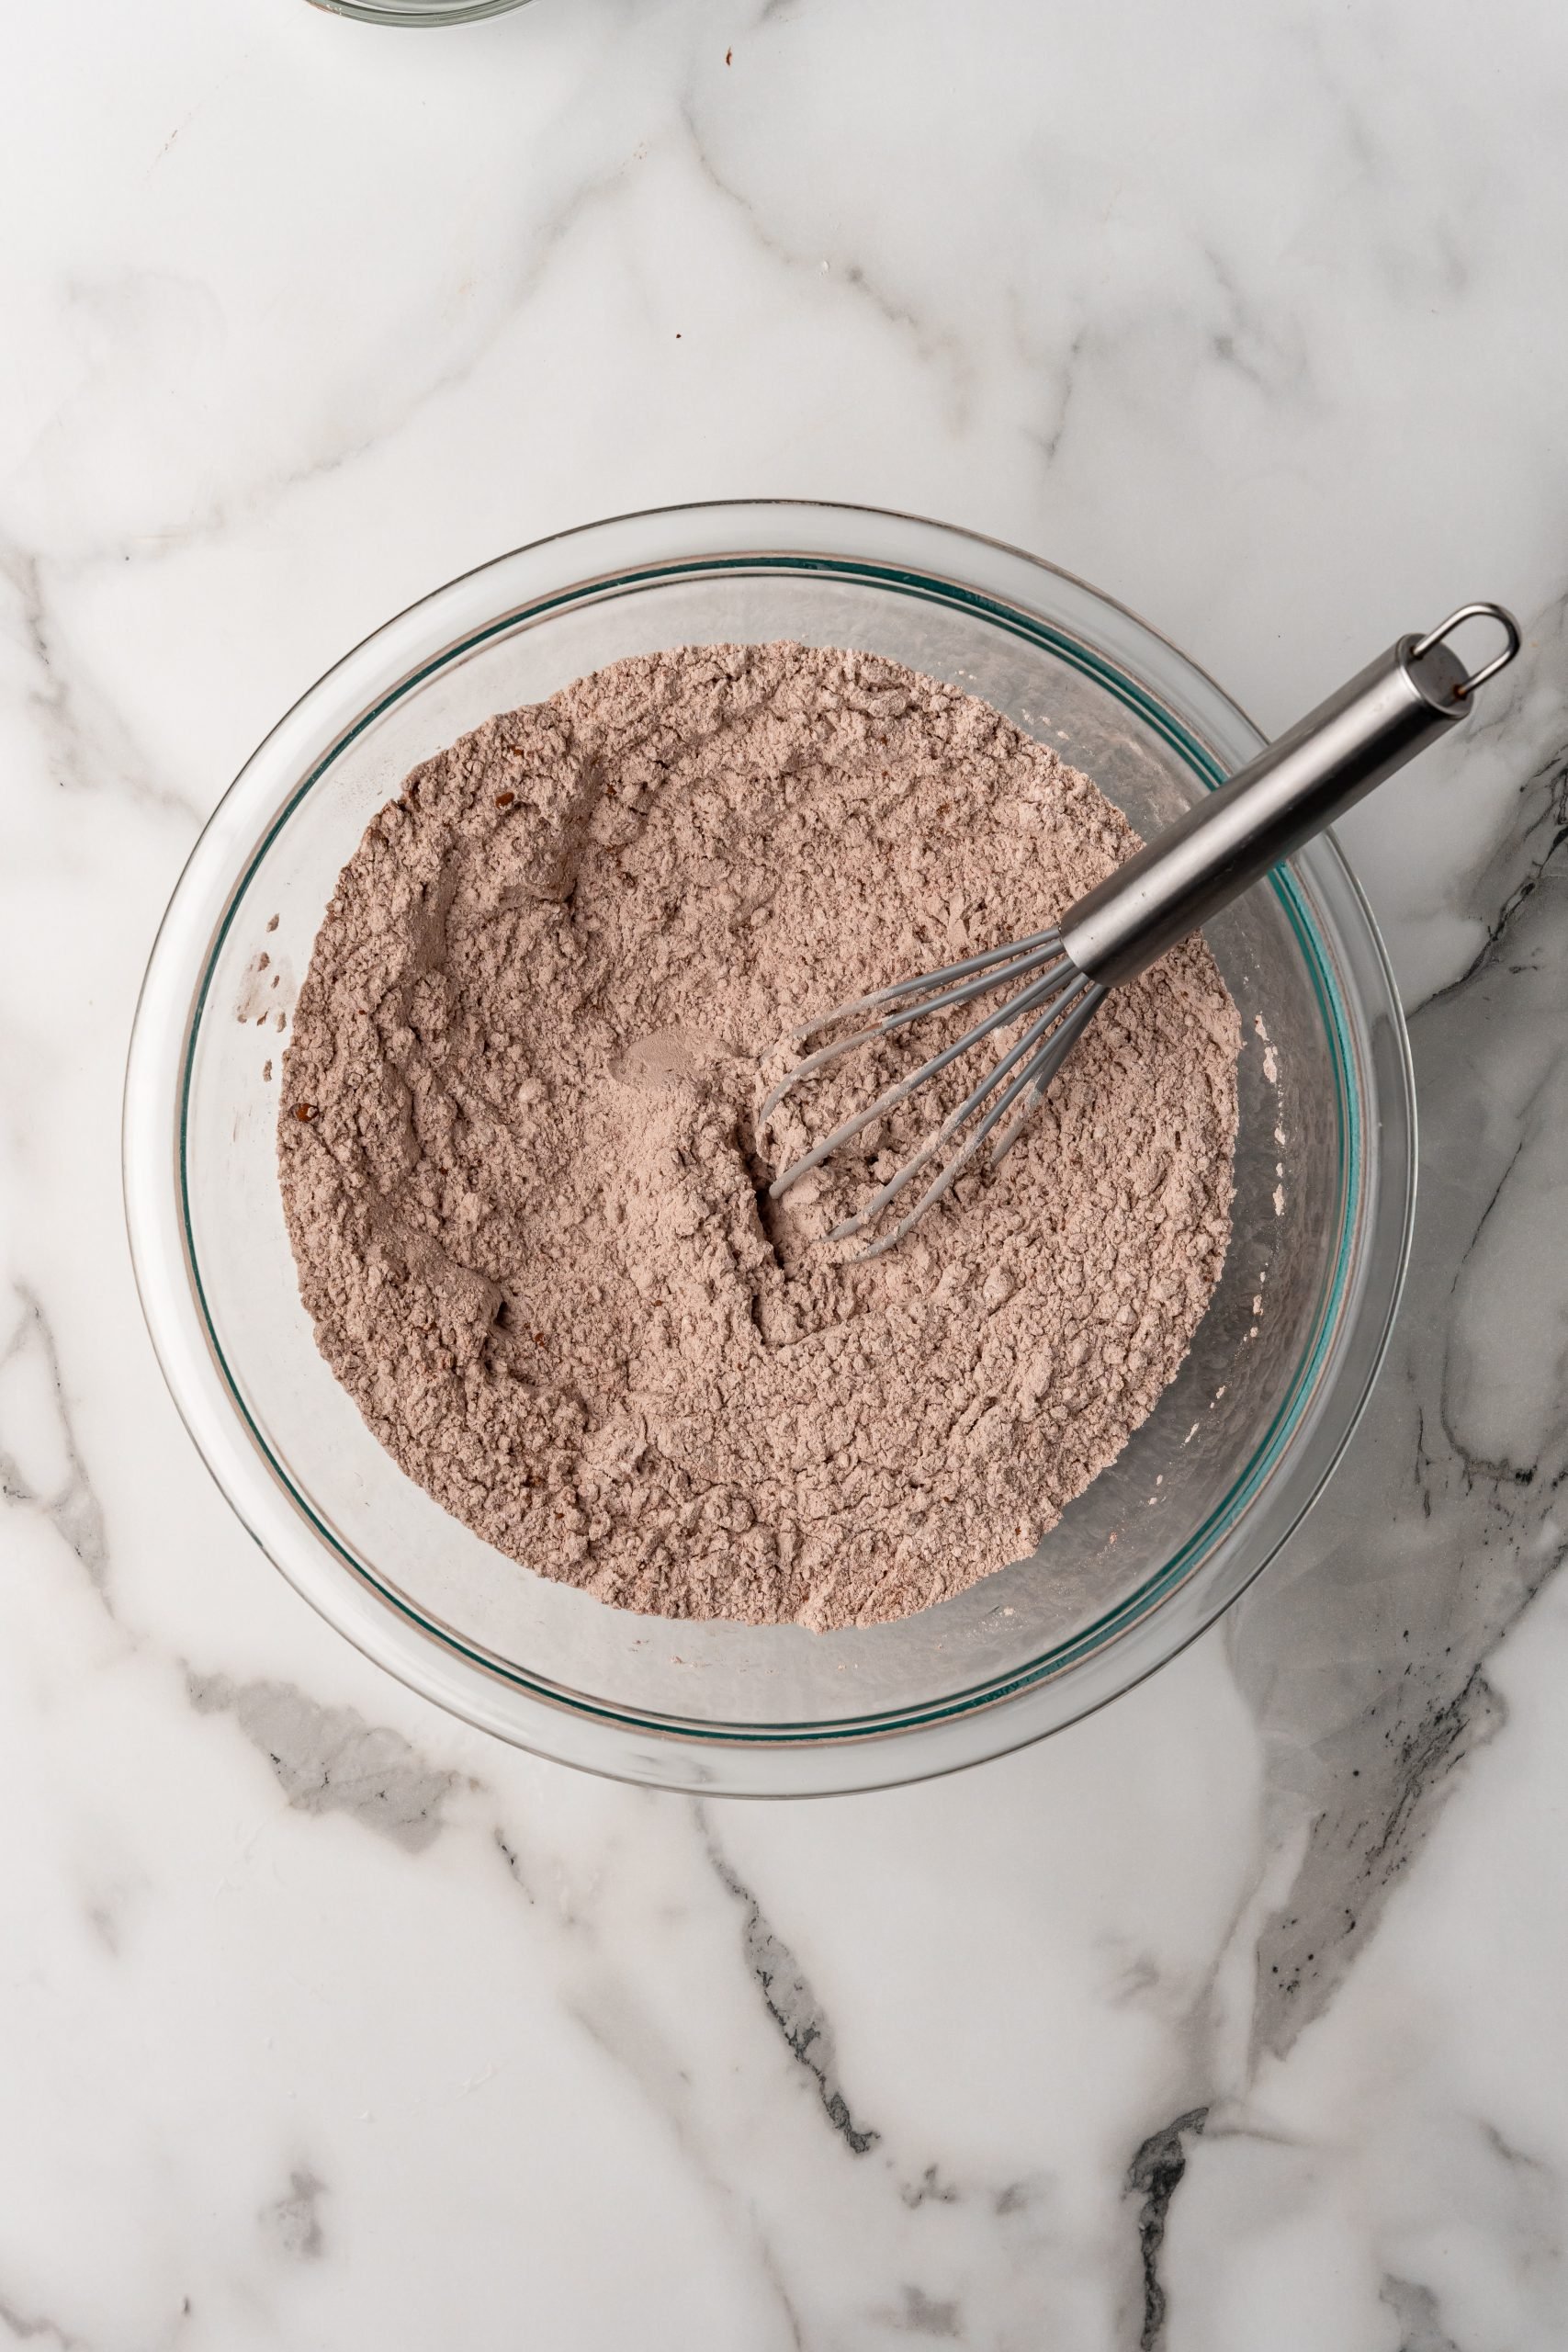 flour and cocoa powder mixed in a glass mixing bowl with a wire whisk